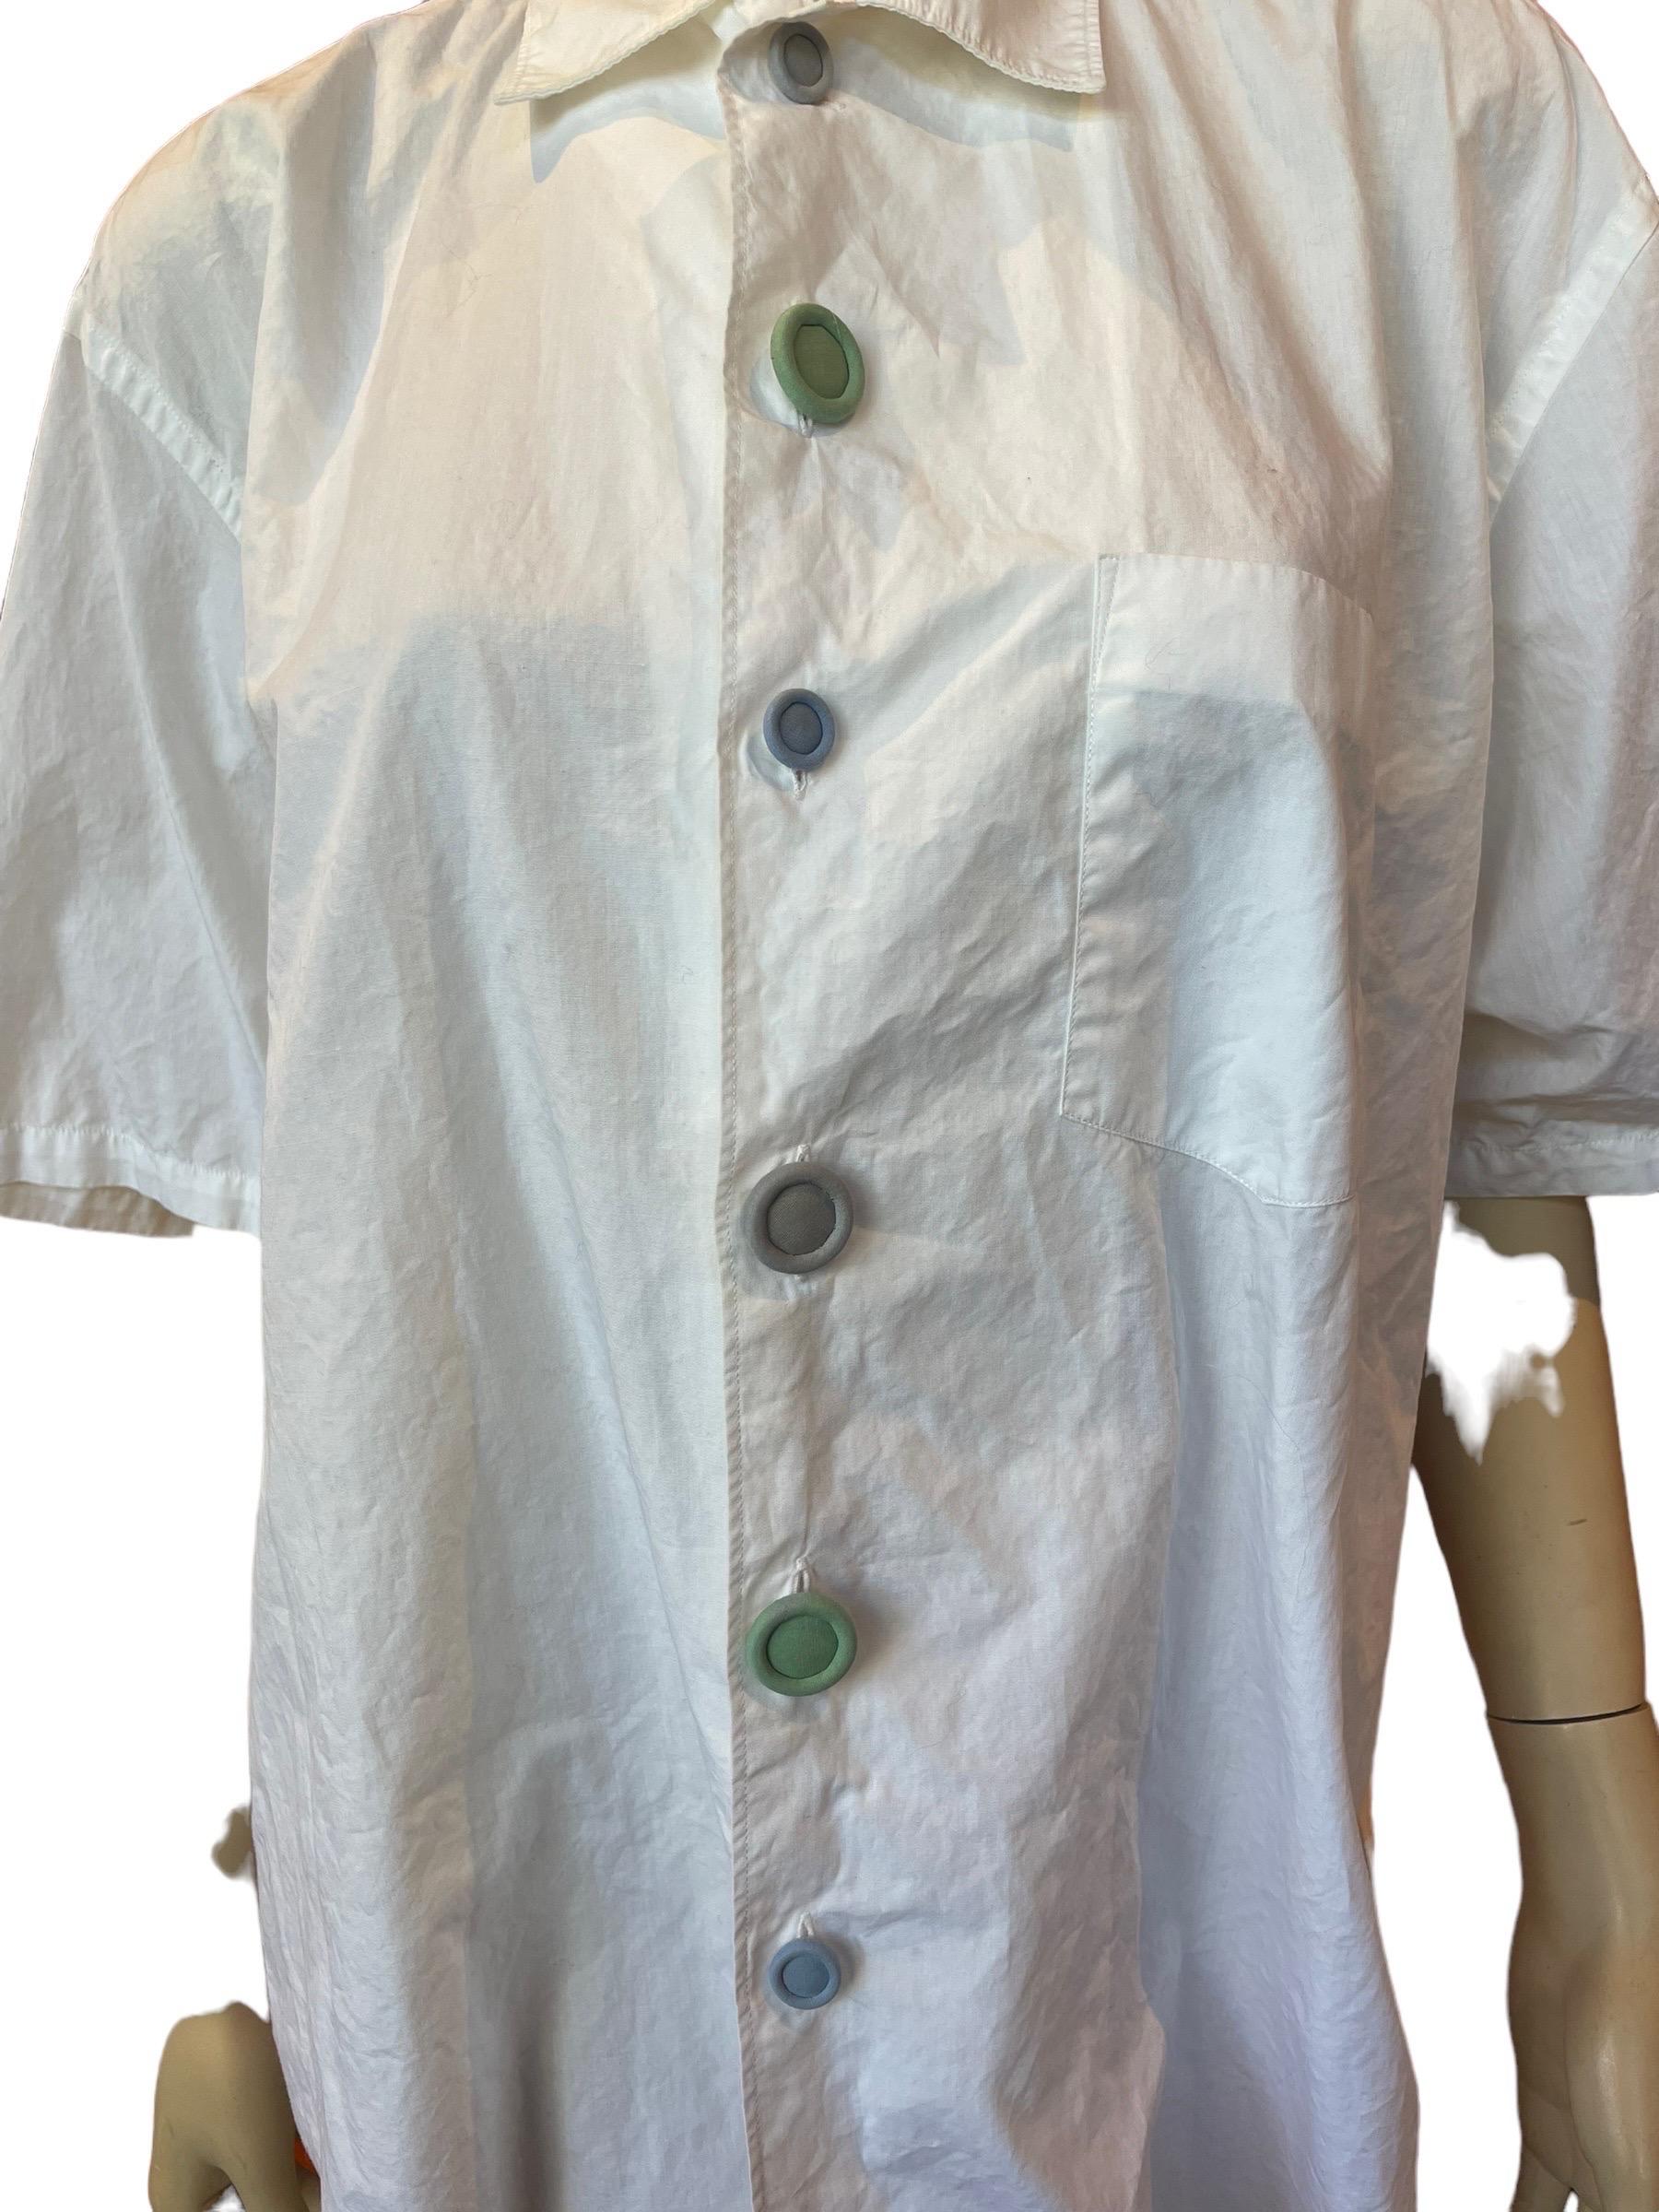 Comme des Garçons Cotton Shirt With Funky Buttons  In Good Condition For Sale In Greenport, NY